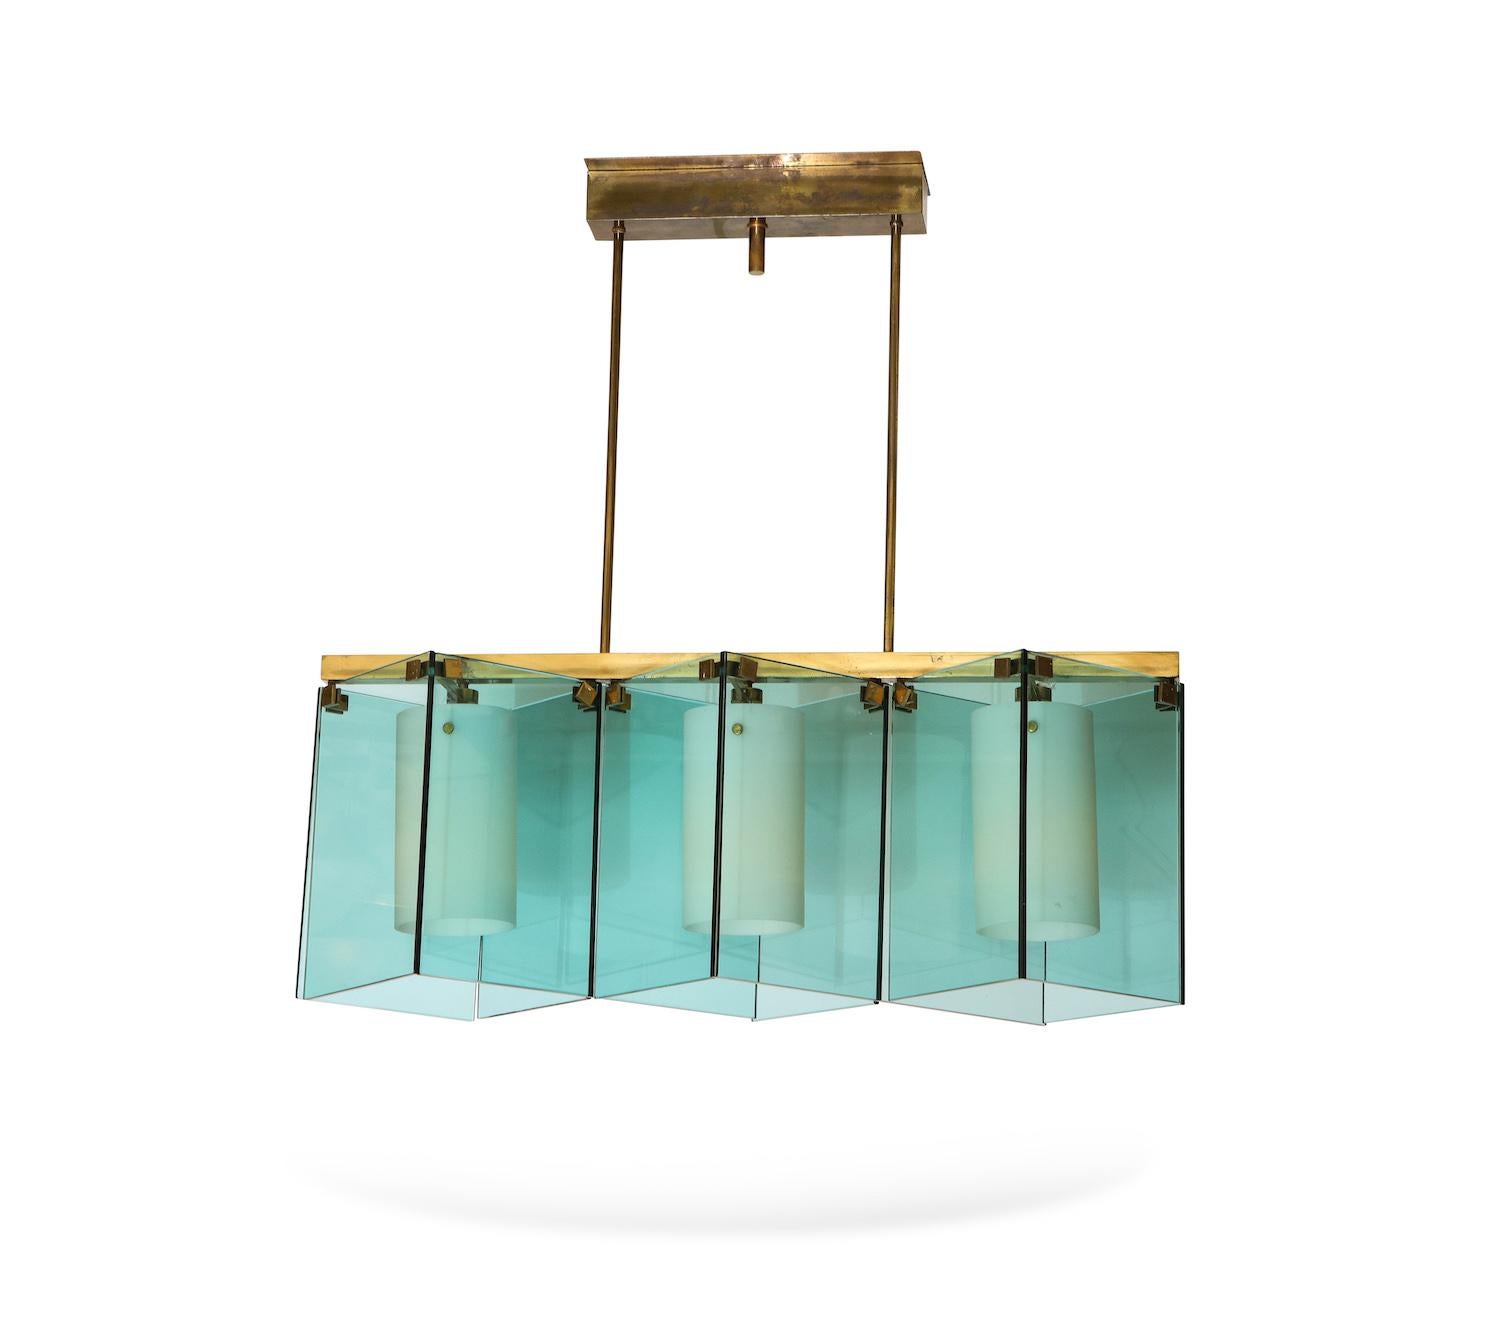 Chandelier #2128 by Max Ingrand for Fontana Arte. Fantastic 3 light fixture featuring thick slabs of aqua-marine glass, with frosted glass cylinder shades and polished brass mounts. Each frosted cylinder conceals a standard Edison socket. Published: